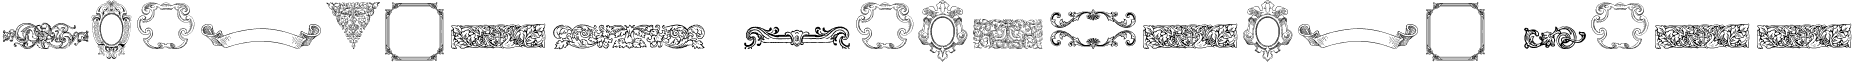 Mortised Ornaments Free font - Mortised Ornaments Free.ttf